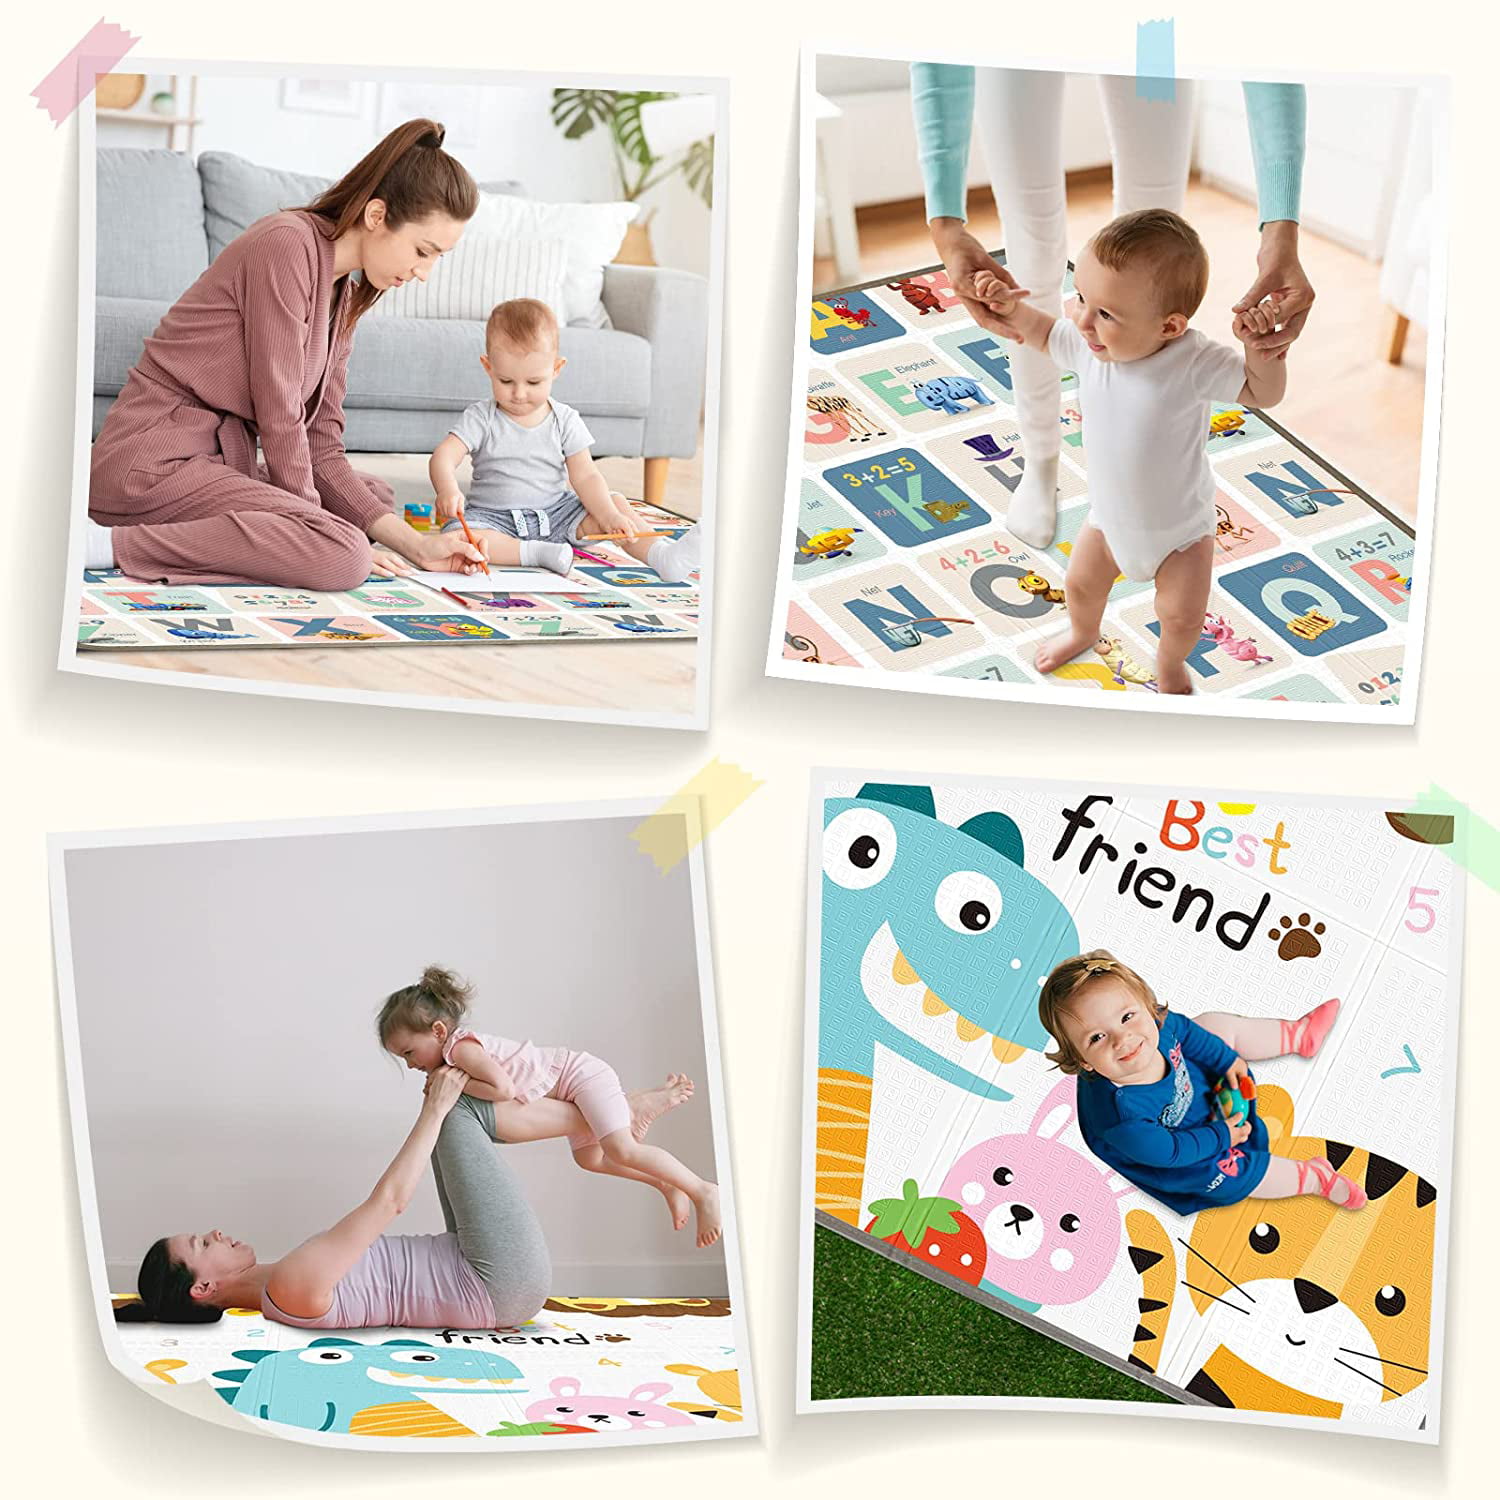 Soft Baby Play Mat,Reversible,Easy to fold Foam Floor Mat,LDPE Waterproof  Indoor and Outdoor for Fitness, Children, Suitable Playing or Crawling (70  x